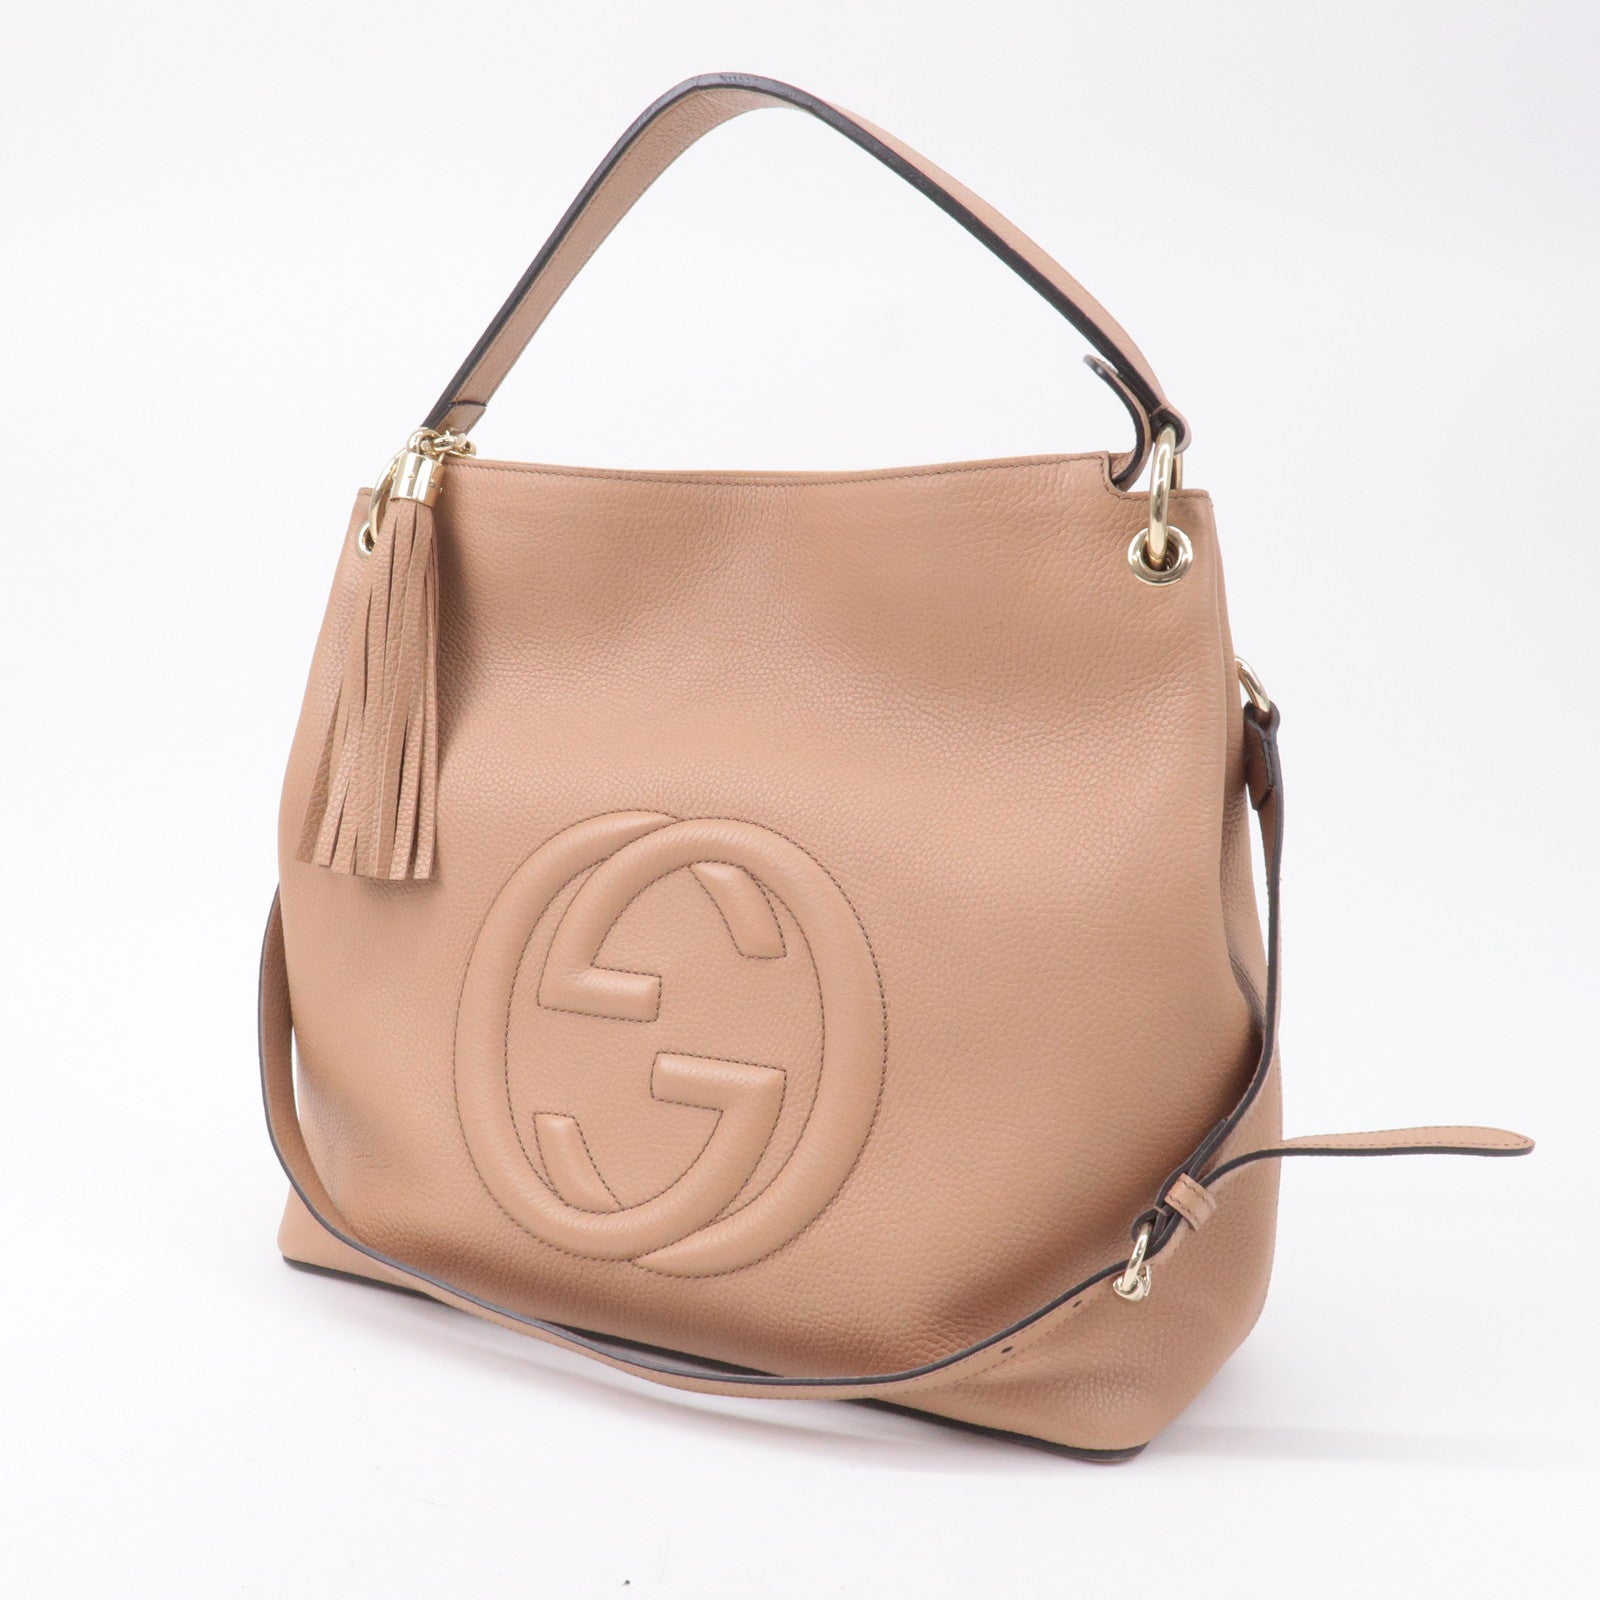 Gucci Soho Leather Hobo in Brown